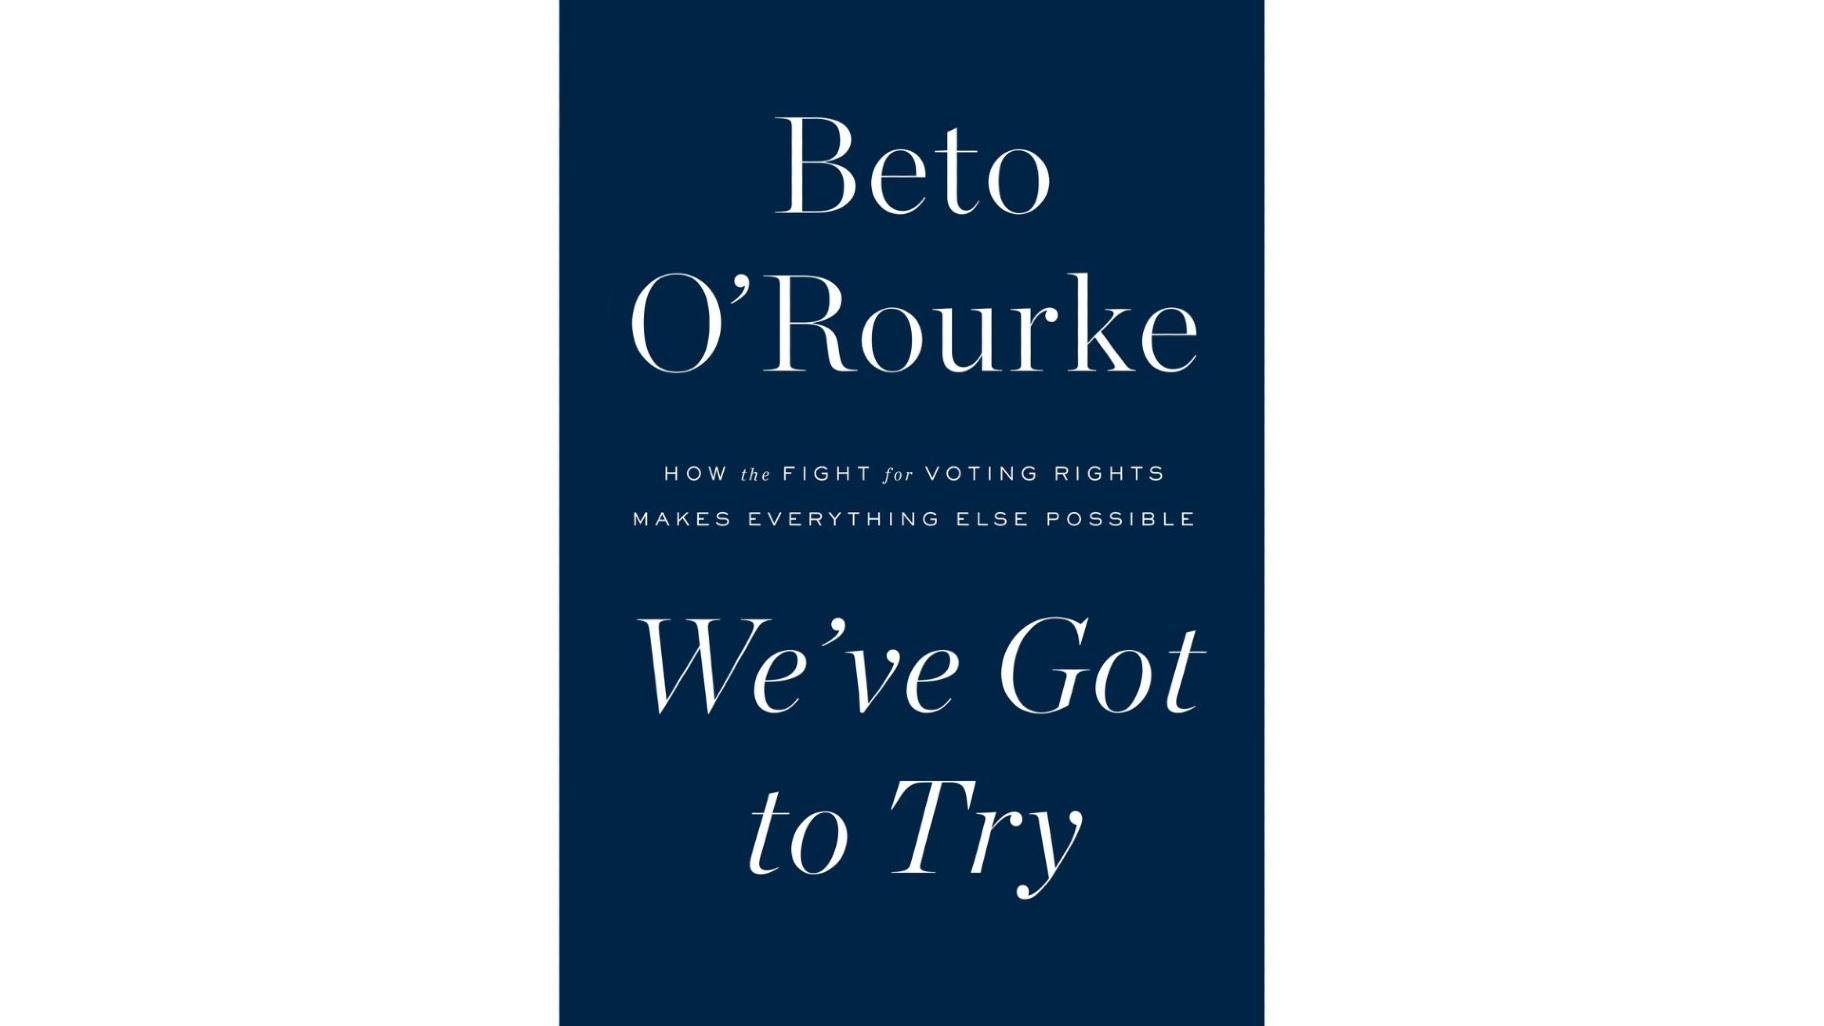 “We’ve Got to Try: How the Fight for Voting Rights Makes Everything Else Possible” by Beto O'Rourke